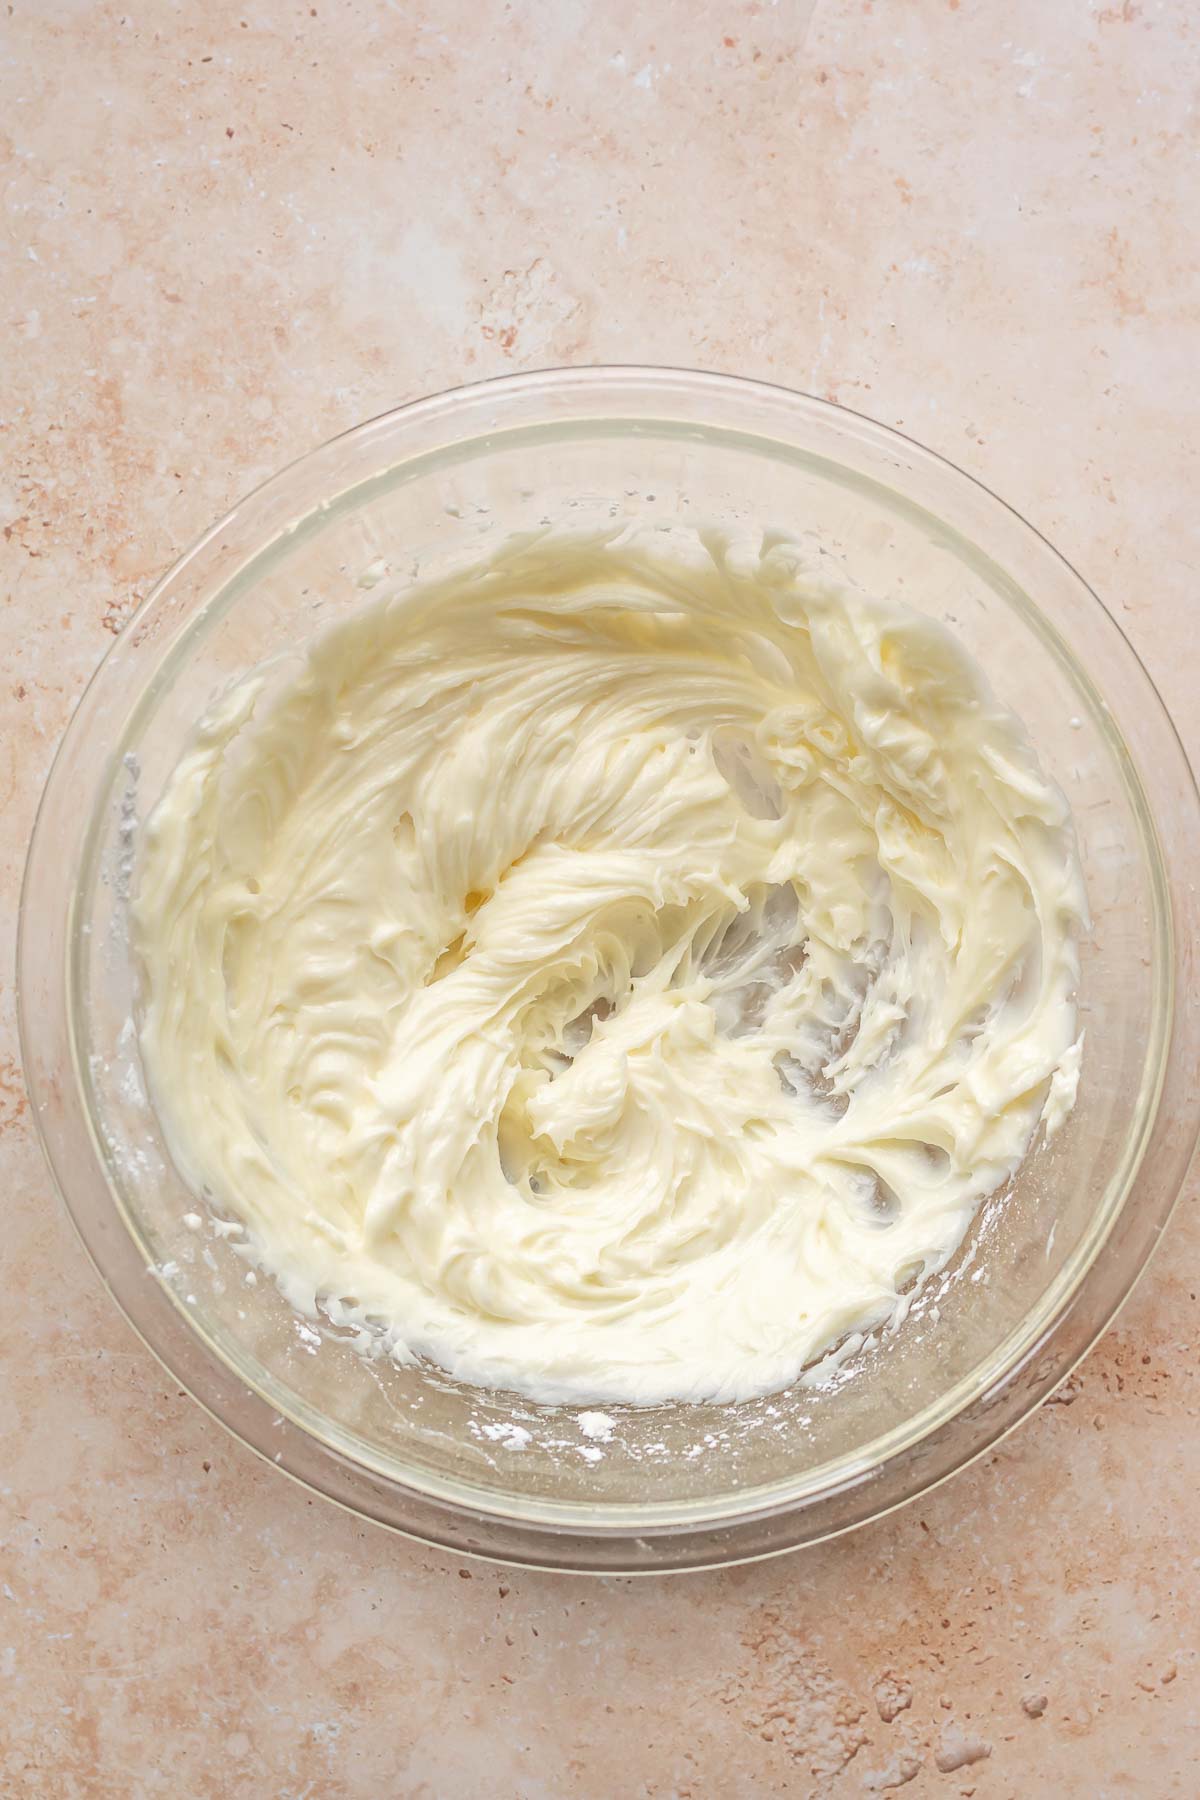 Cream cheese and powdered sugar creamed together in a bowl.